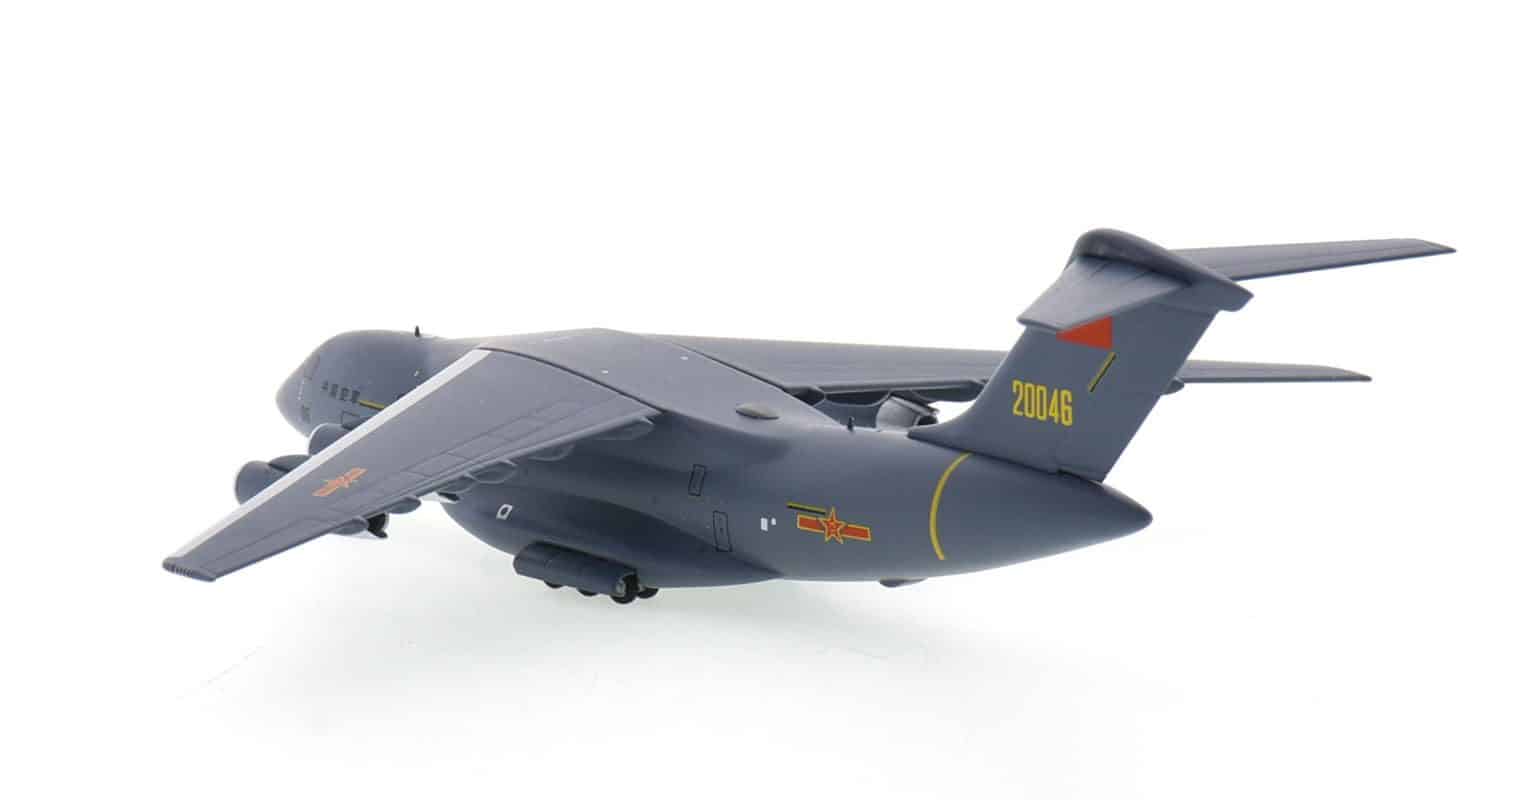 Rear view of NG Models NG22017 - 1/400 scale diecast model of the Xi'an Y-20A Kunpeng, s/n 20046 of the PLAAF